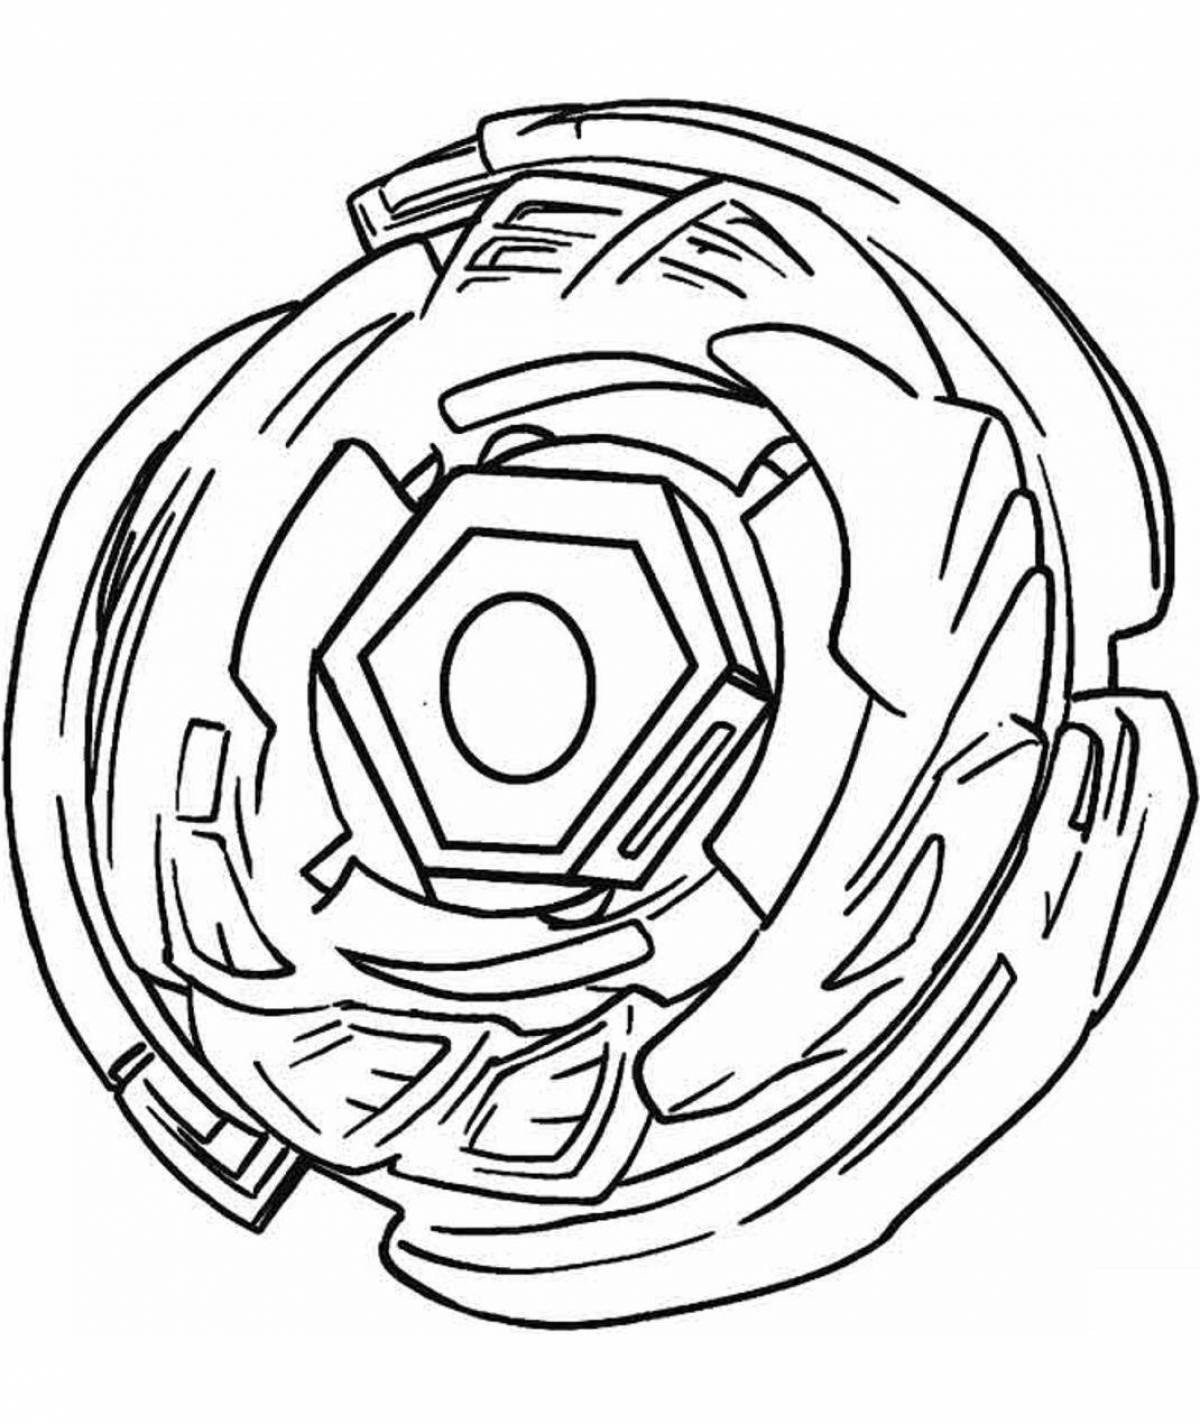 Aegis nano awesome coloring page